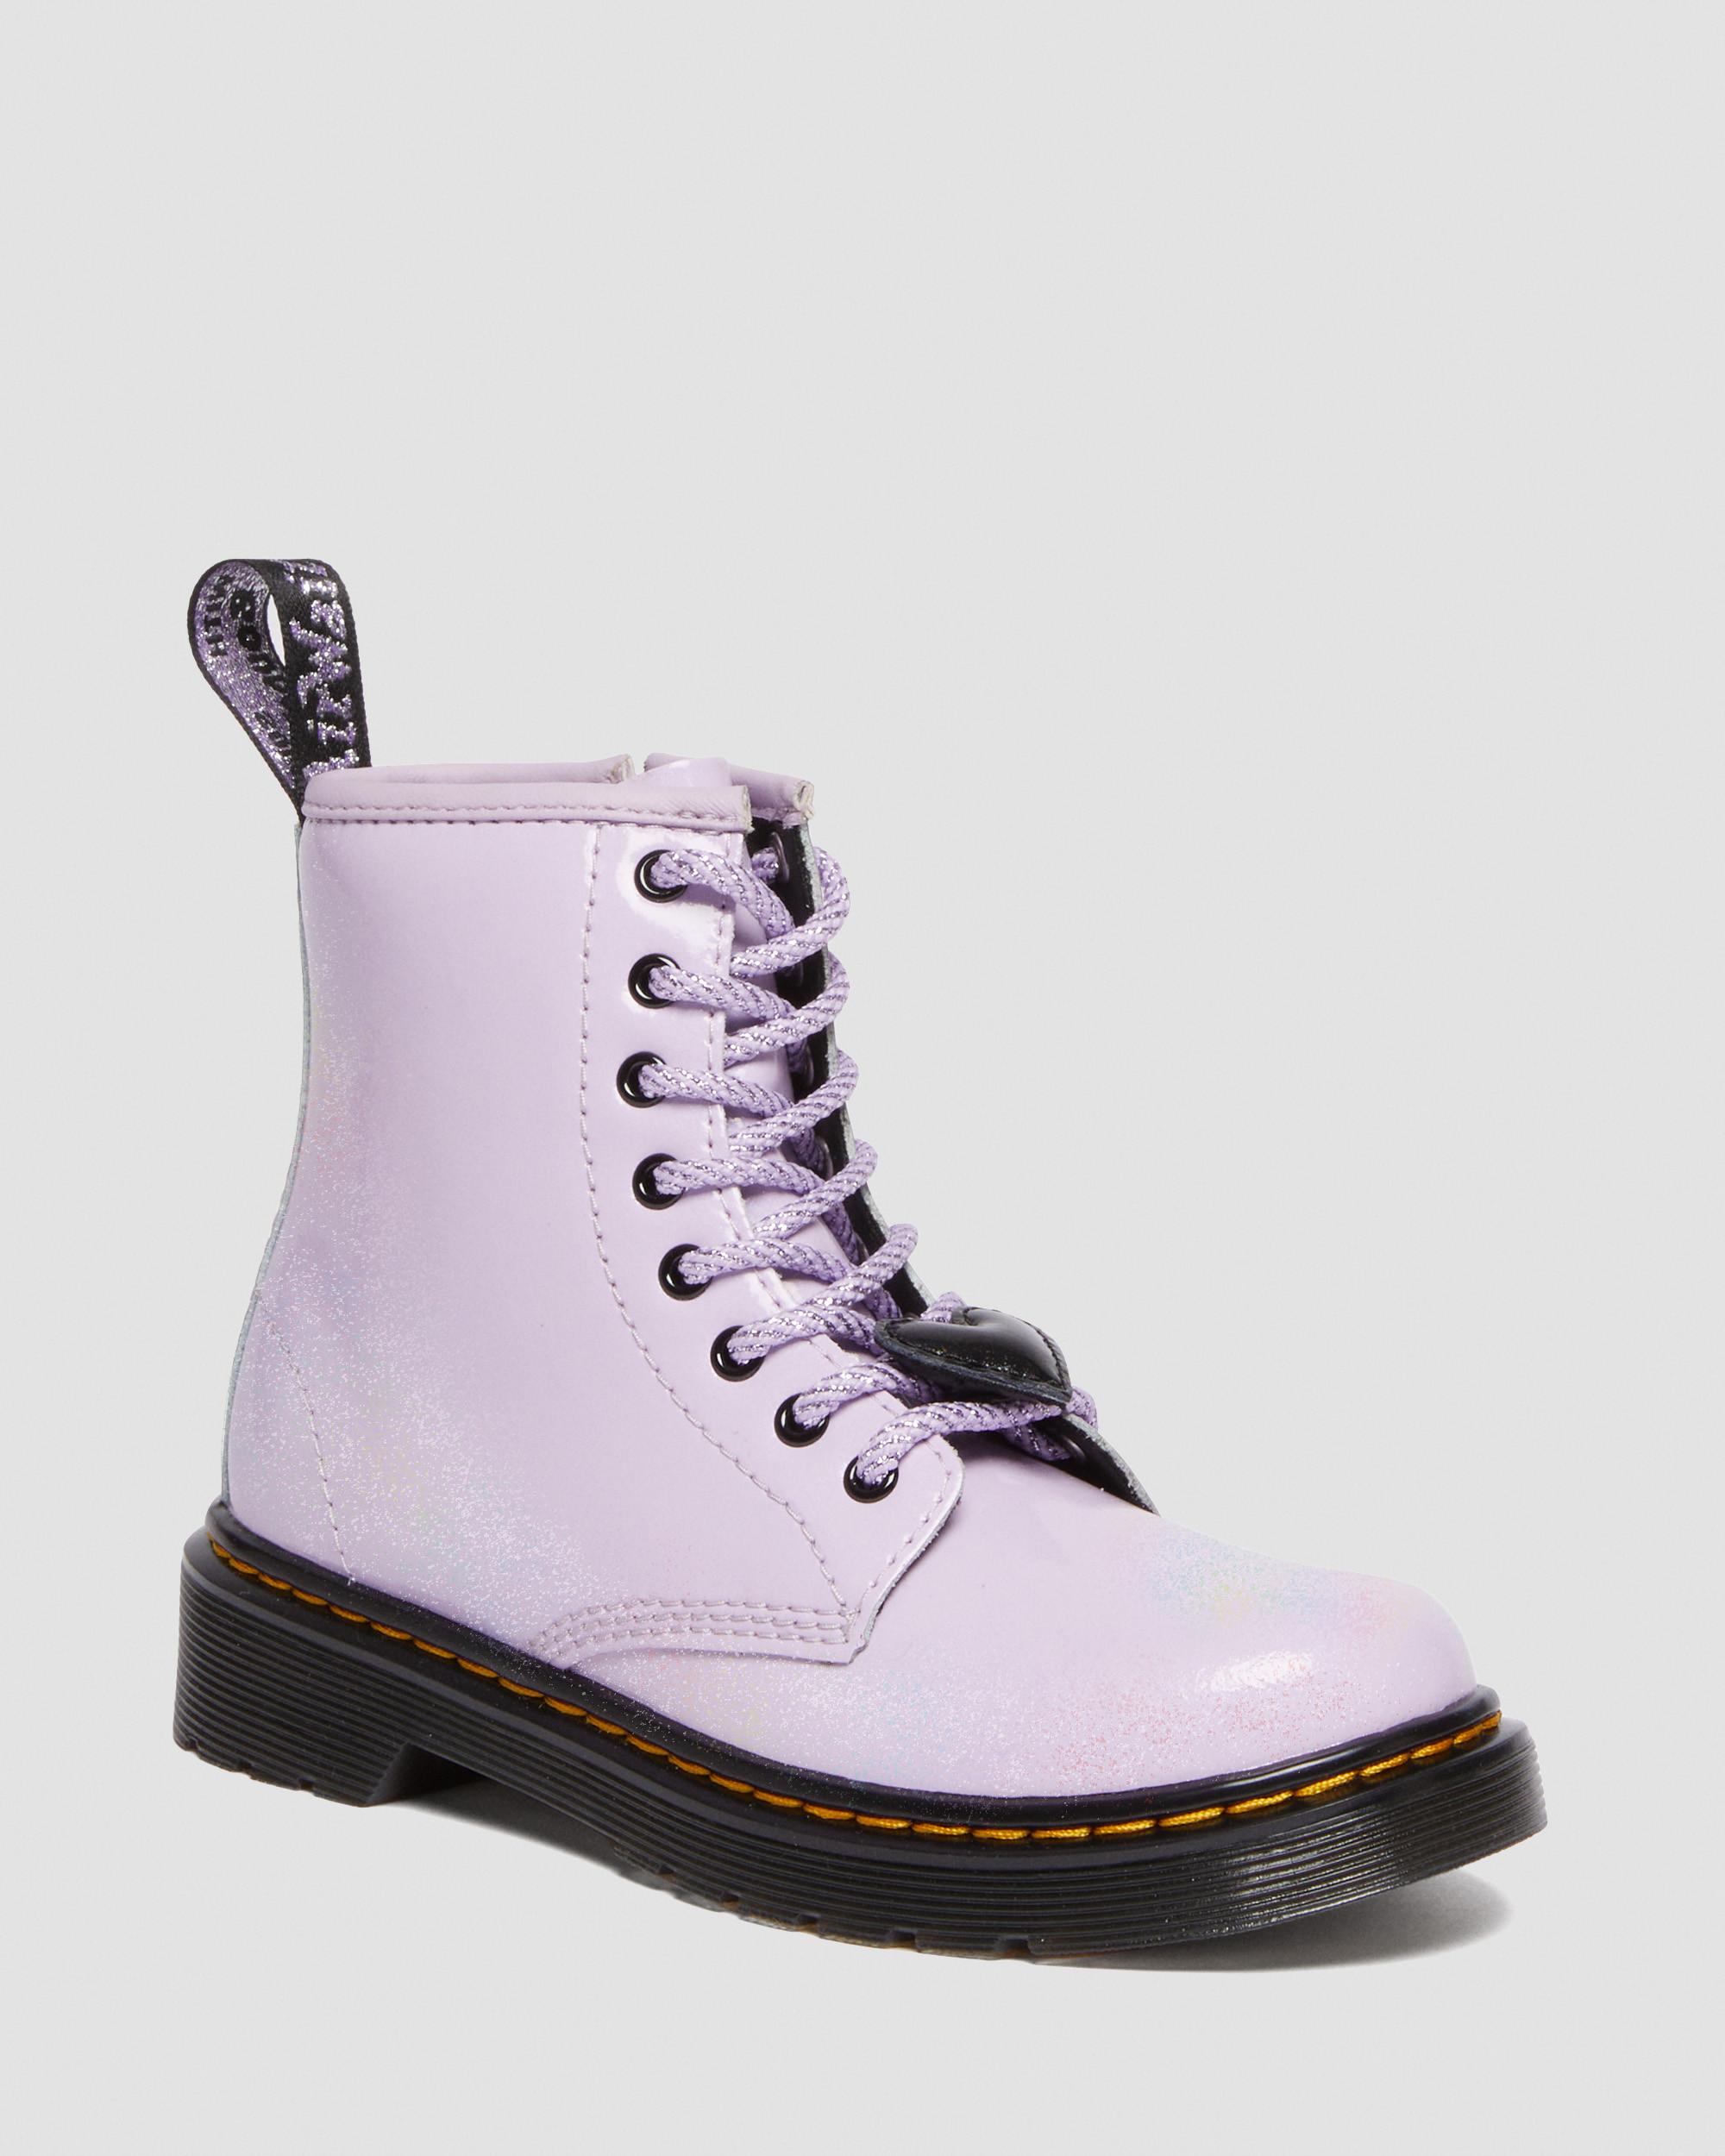 Junior 1460 Shimmer Heart Lace Up Boots in Lilac | Dr. Martens